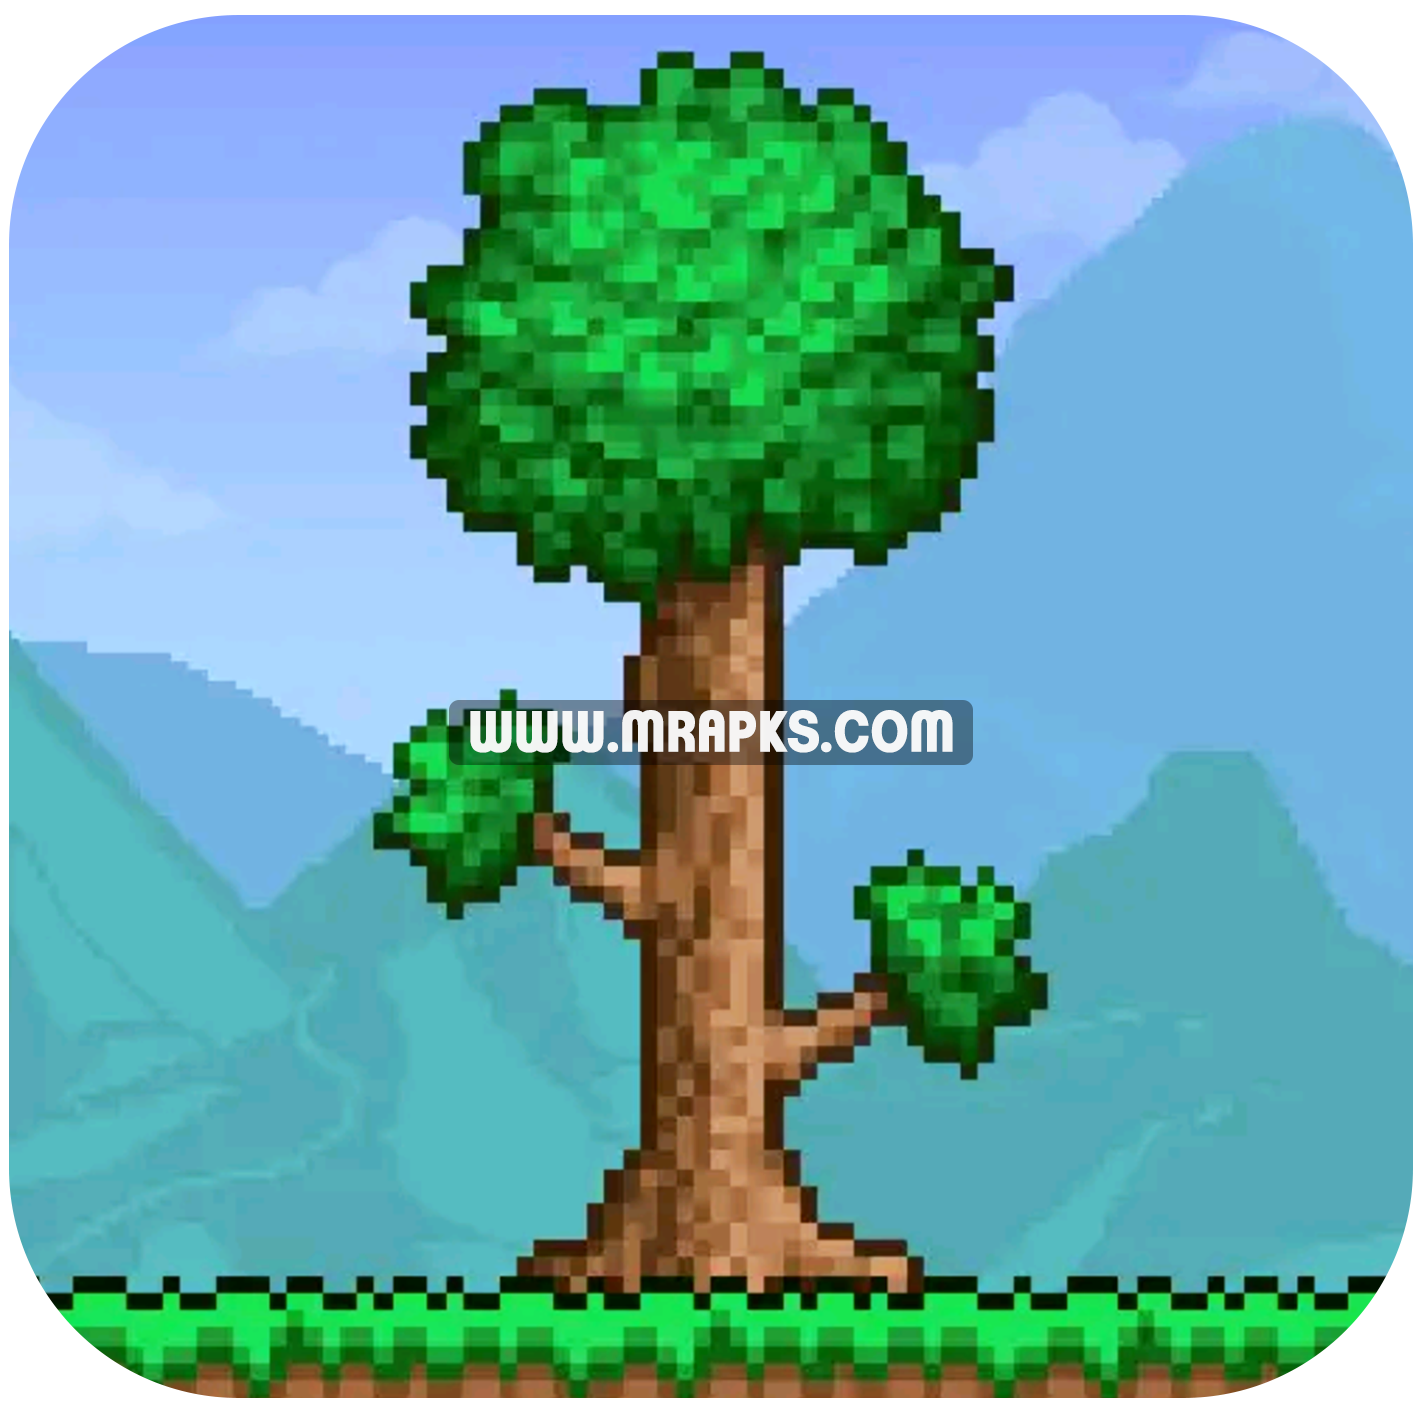 Terraria v1.4.0.5.2.1 (Paid) (Patched) Apk